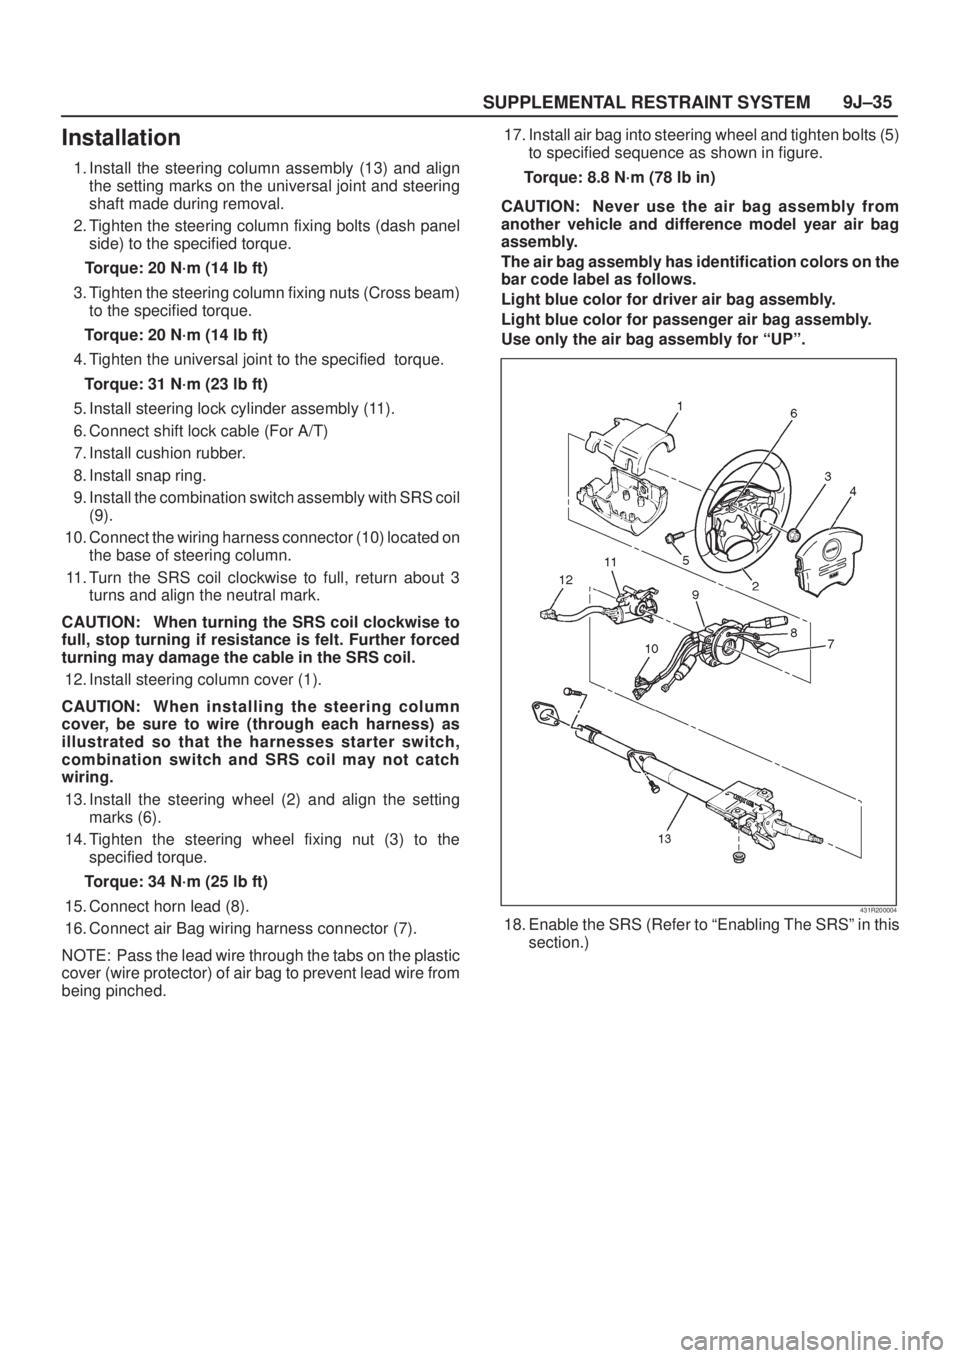 ISUZU AXIOM 2002  Service Repair Manual SUPPLEMENTAL RESTRAINT SYSTEM9J±35
Installation
1. Install the steering column assembly (13) and align
the setting marks on the universal joint and steering
shaft made during removal.
2. Tighten the 